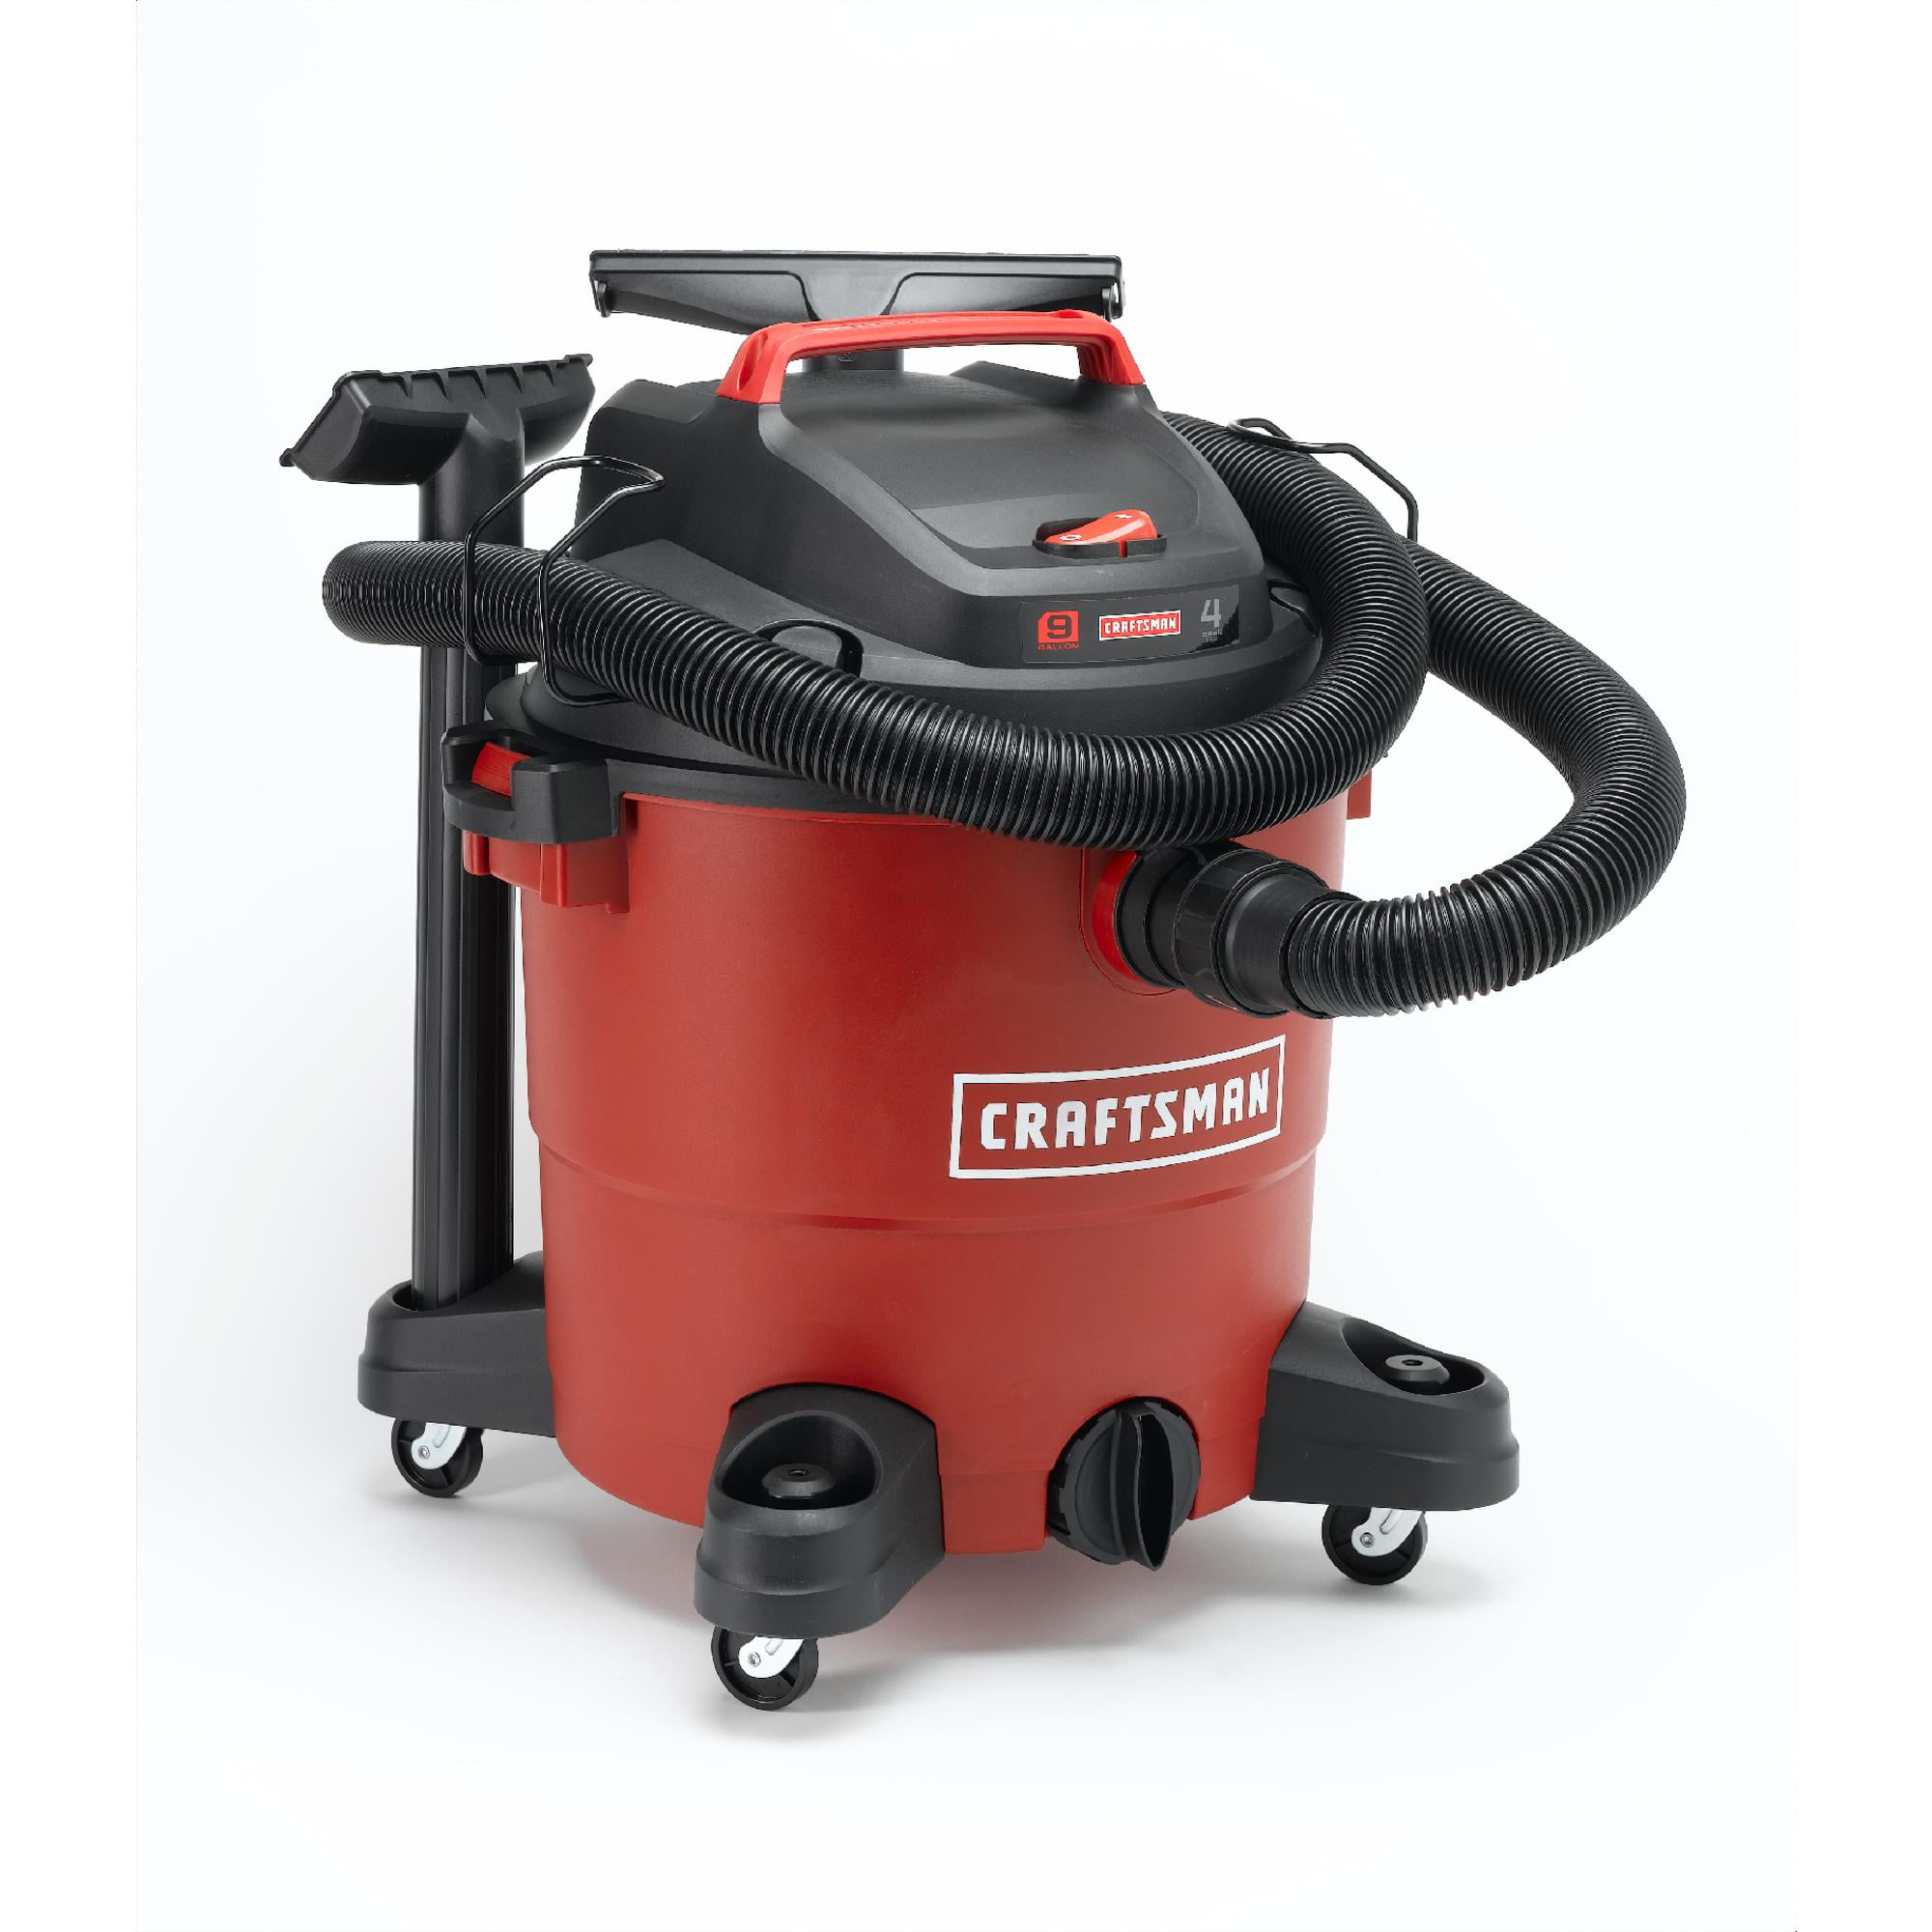 CRAFTSMAN 5-Gallons 3-HP Corded Wet/Dry Shop Vacuum with Accessories  Included in the Shop Vacuums department at